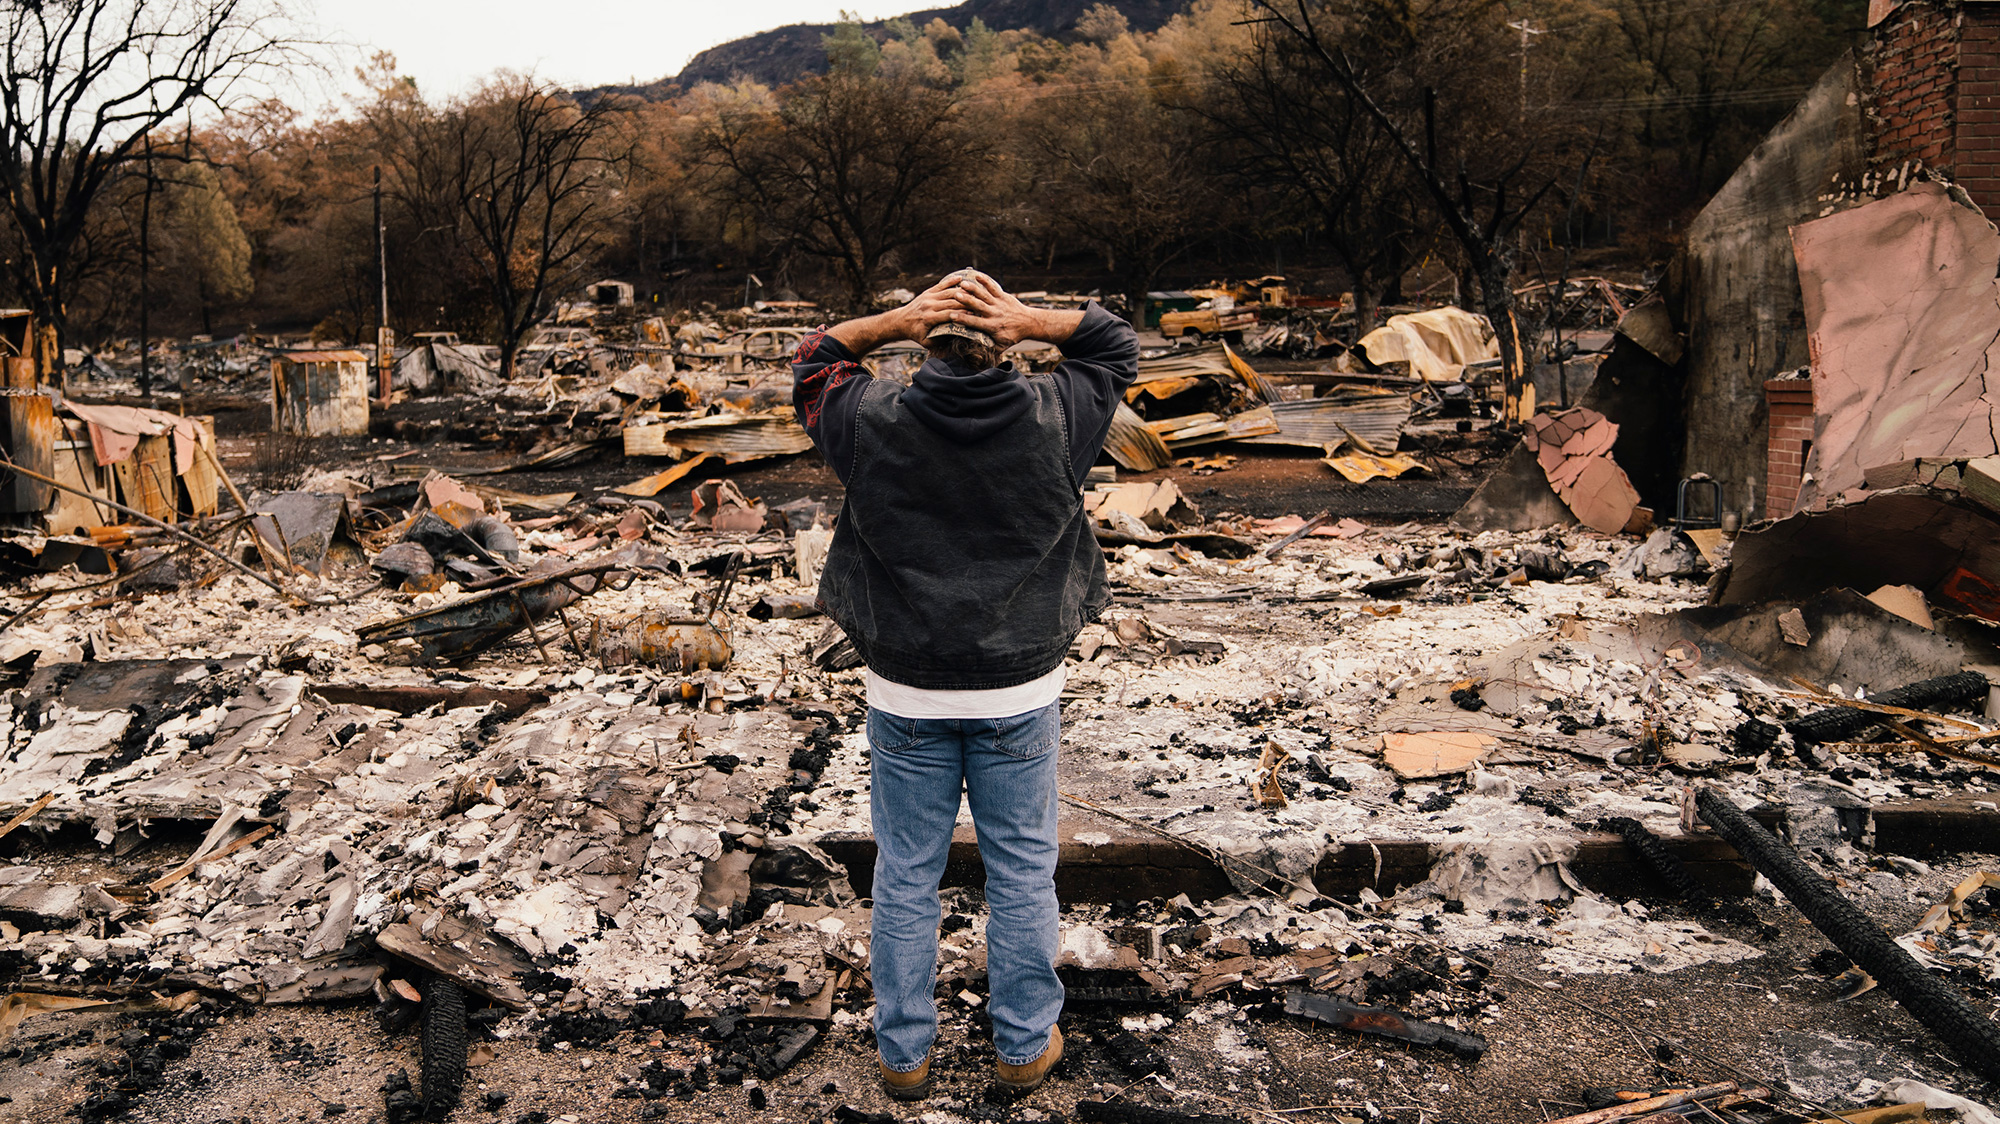 FEMA Spent a Ton Fighting California’s Fires. Now It Wants Victims to